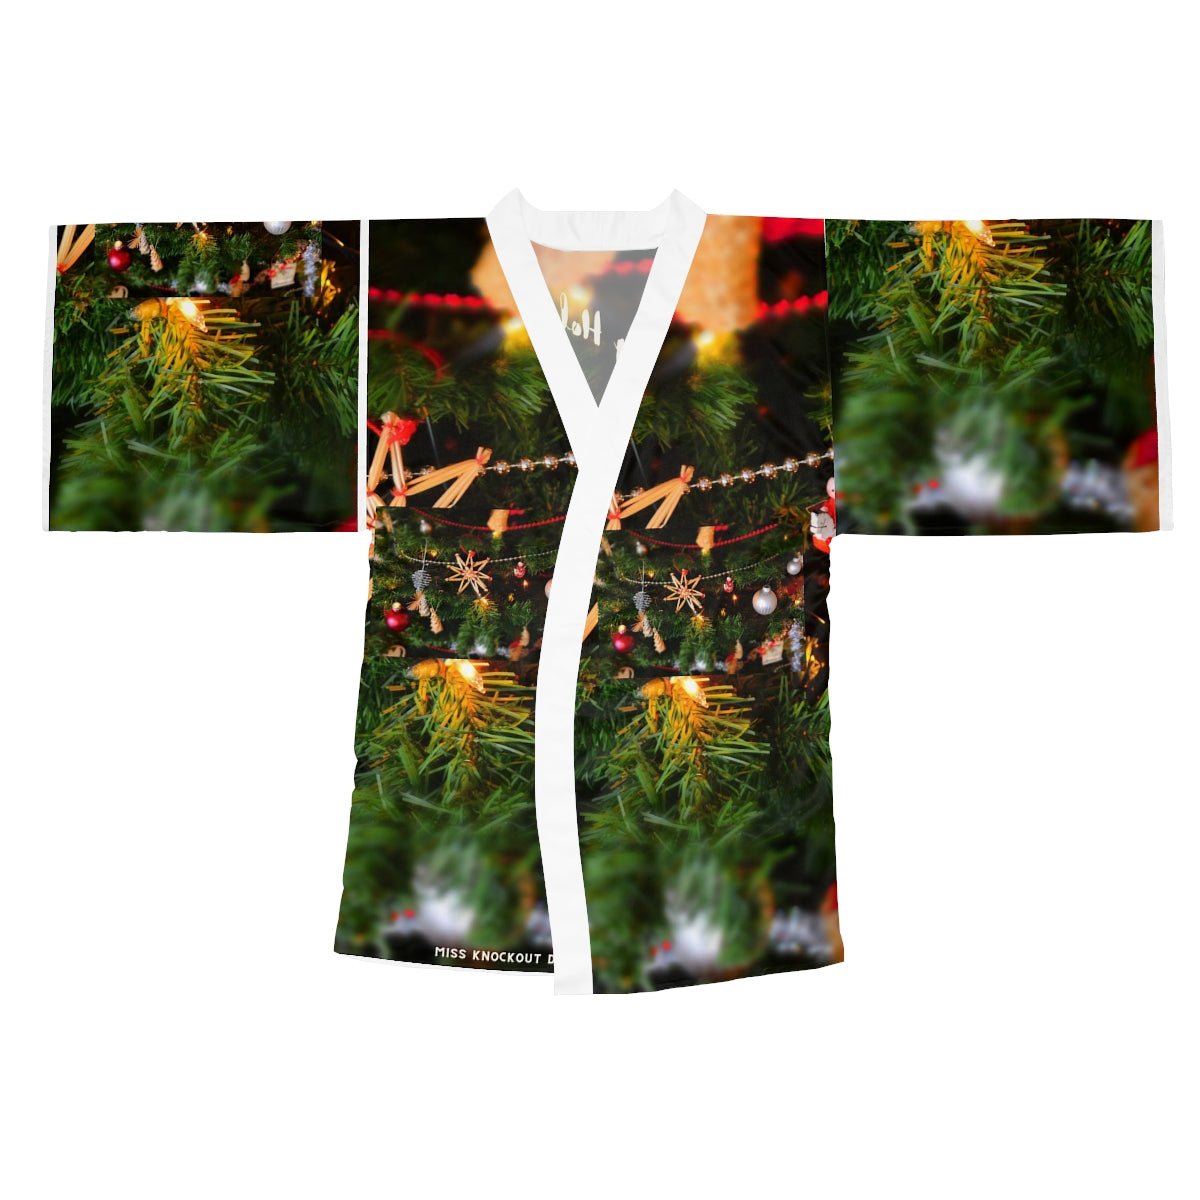 Miss Knockout Long Sleeve Kimono Holiday Robe Miss knockout ™ Merchandise holiday Apparel